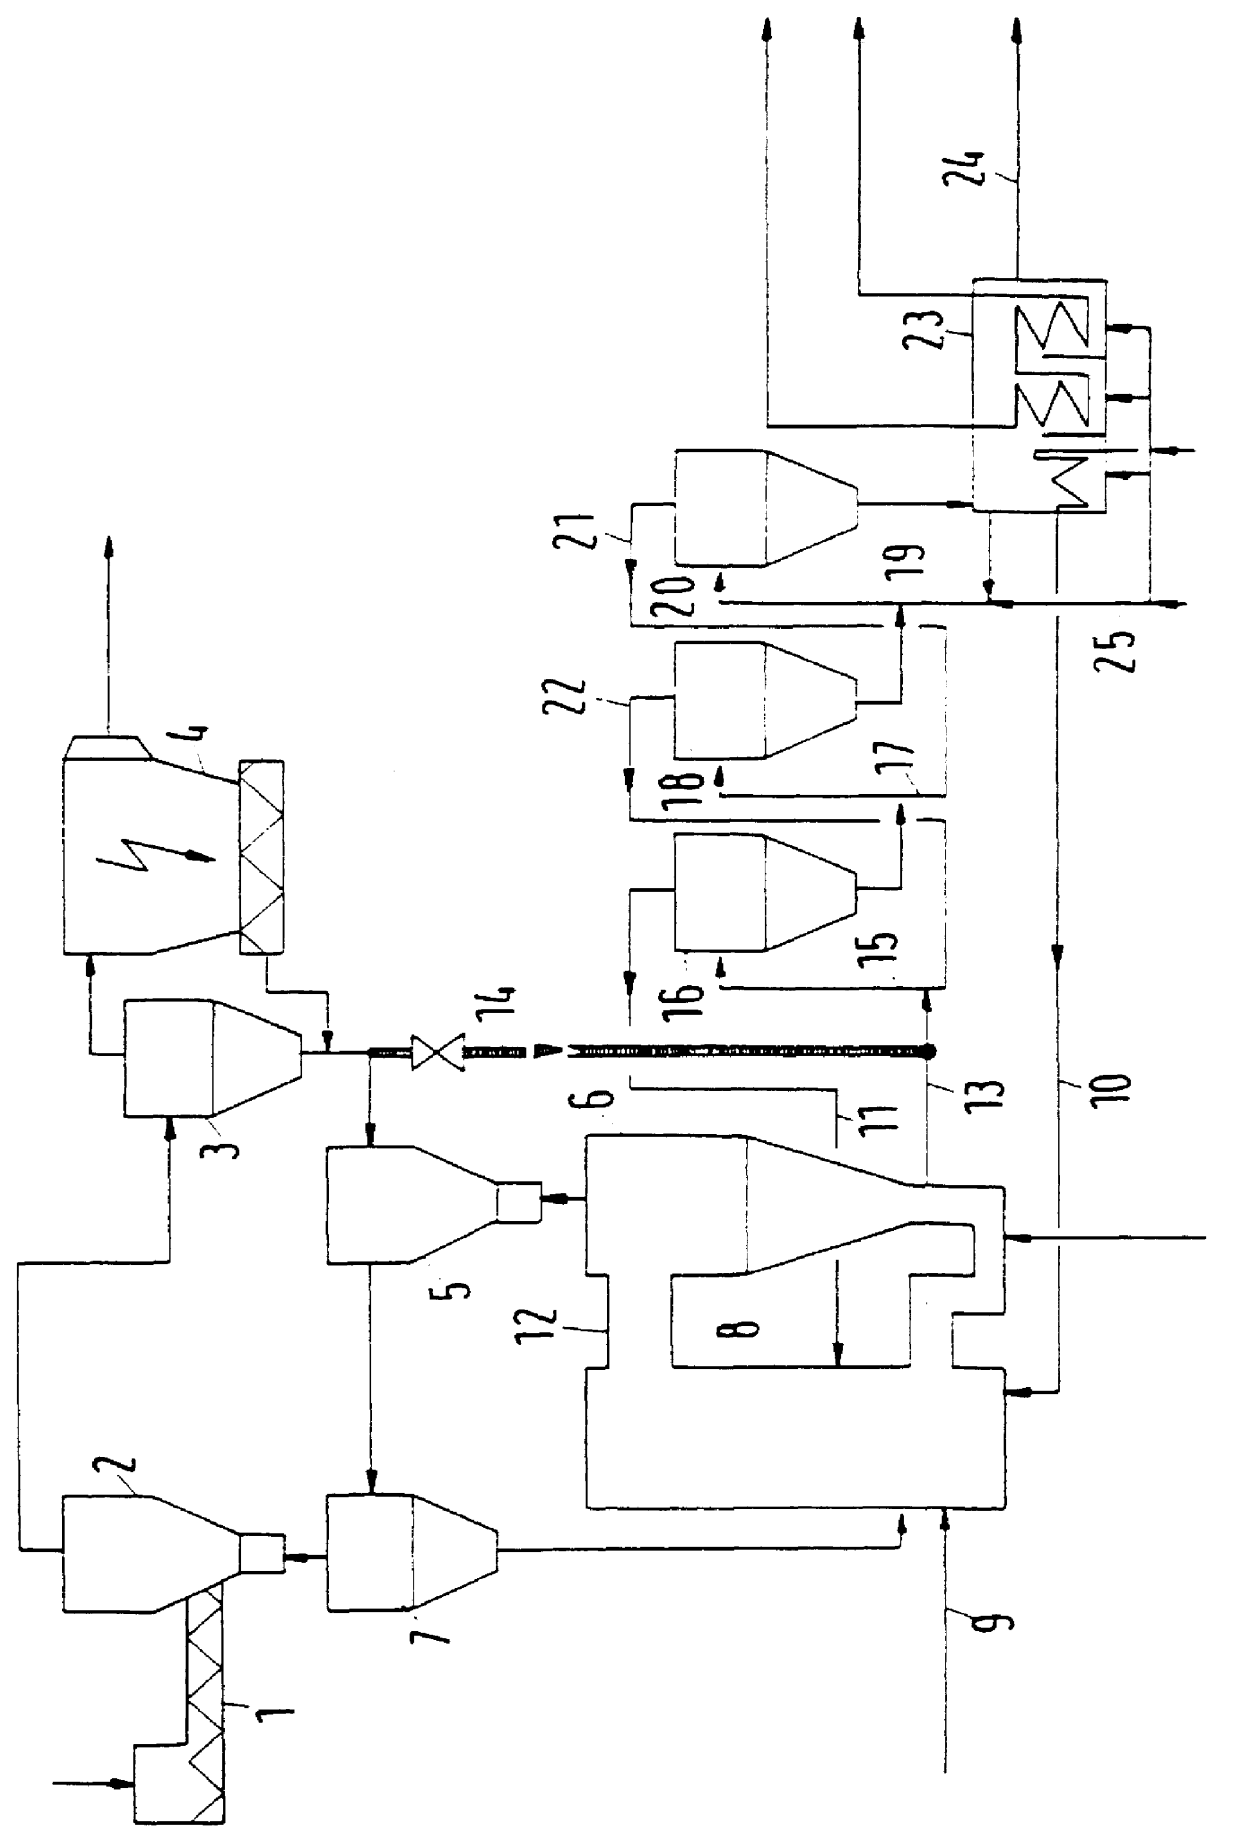 Fluidized bed process for producing alumina from aluminum hydroxide